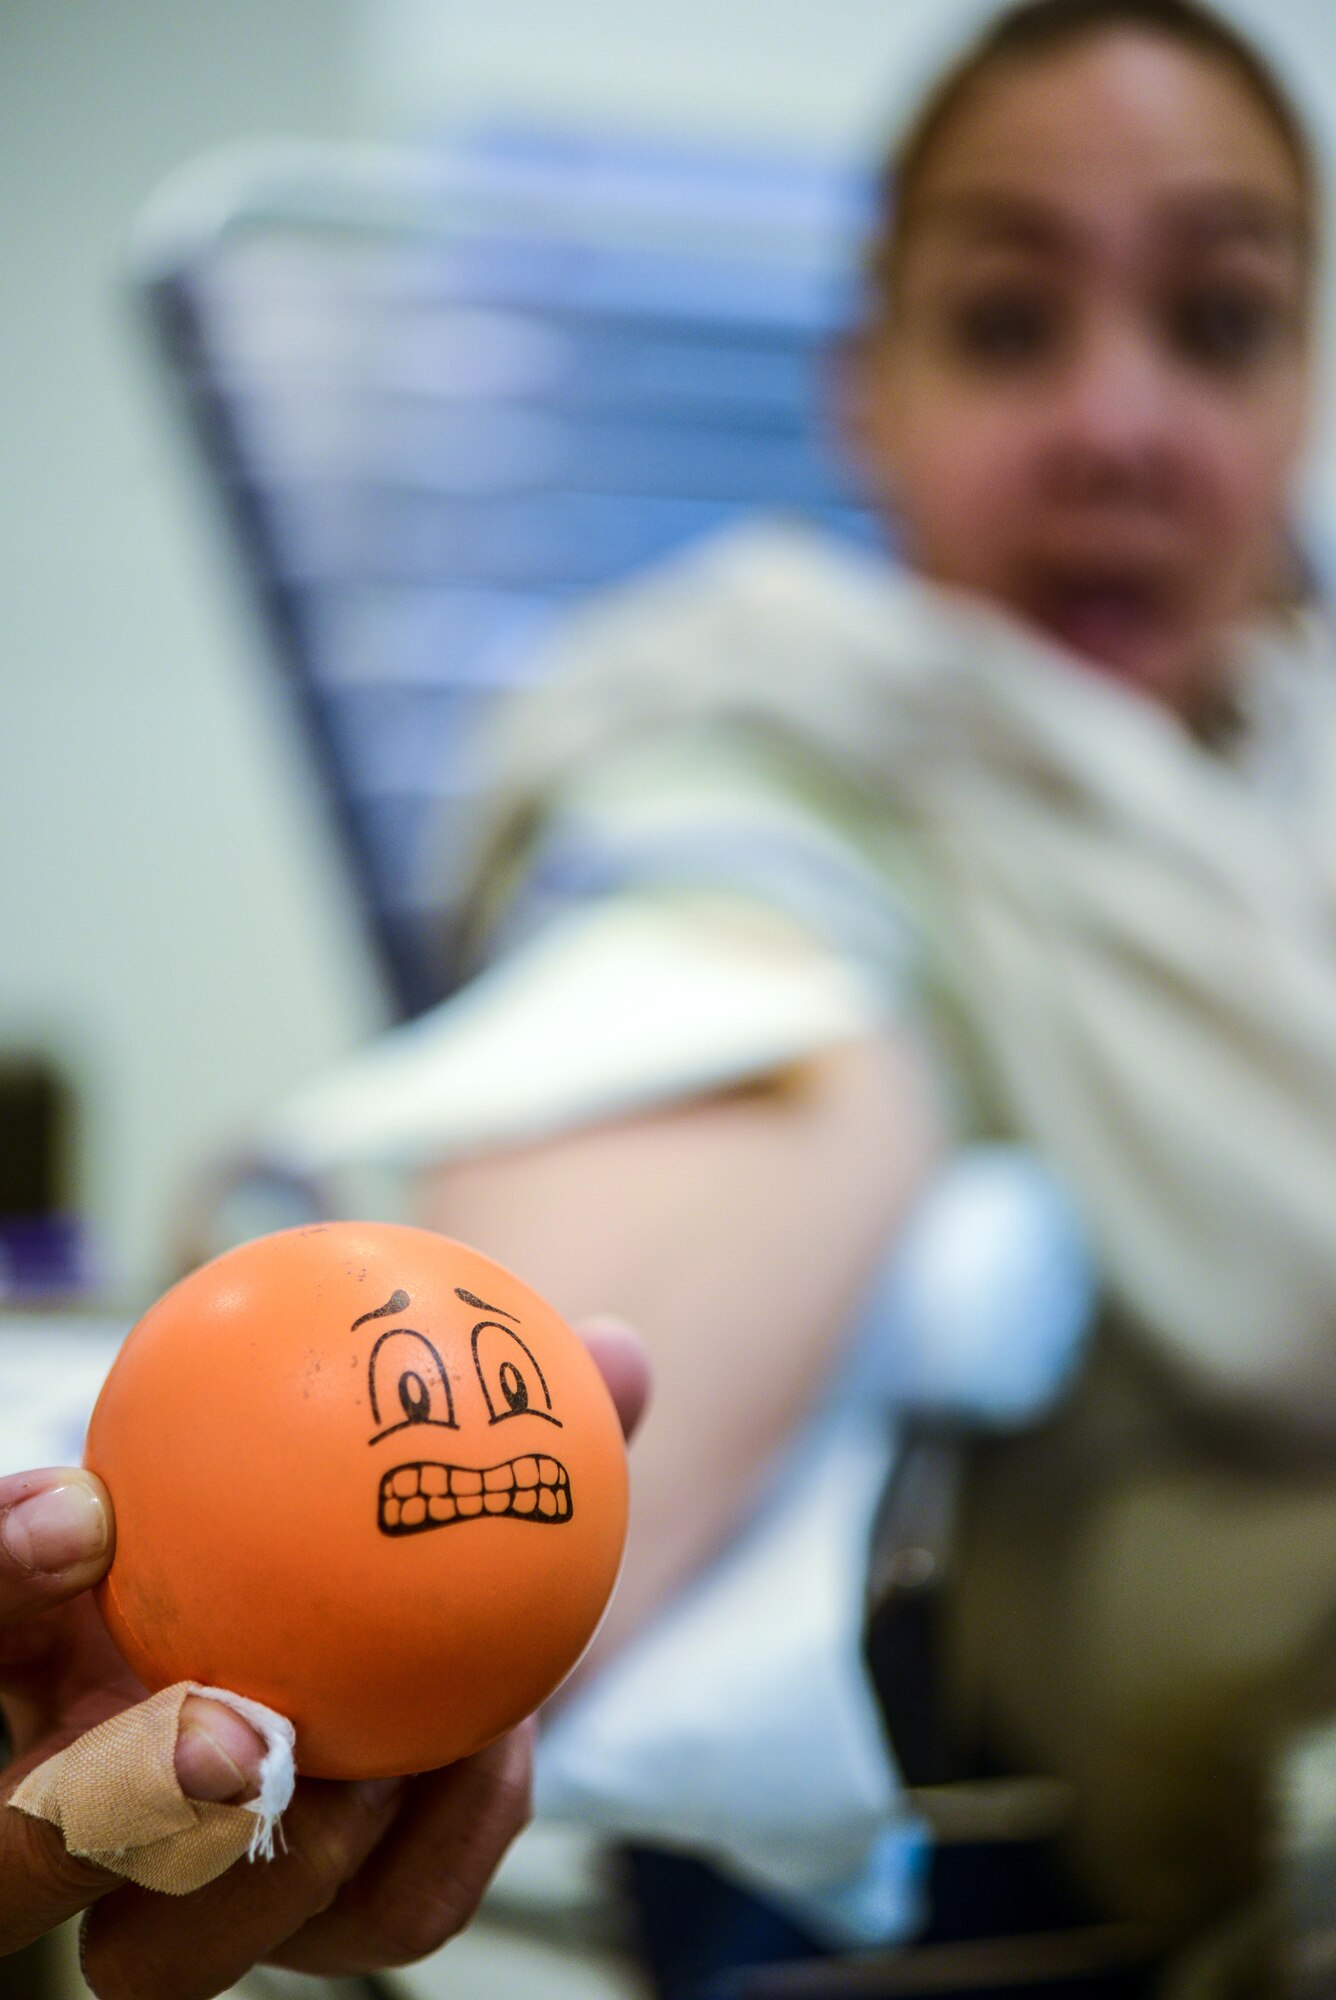 U.S. Air Force Staff Sgt. Deeanne Rosario, a Reservist air transportation journeyman with the 73rd Aerial Port Squadron, Fort Worth, Texas, holds a stress ball as she is prepares to donate blood during an Armed Services Blood Program-Europe blood drive at the Kaiserslautern Military Community Center, Sept. 20, 2016. The ASBP collected blood to be used by U.S. service members and their families. The majority of the blood collected is sent to deployed locations. (U.S. Air Force photo by Staff Sgt. Timothy Moore)